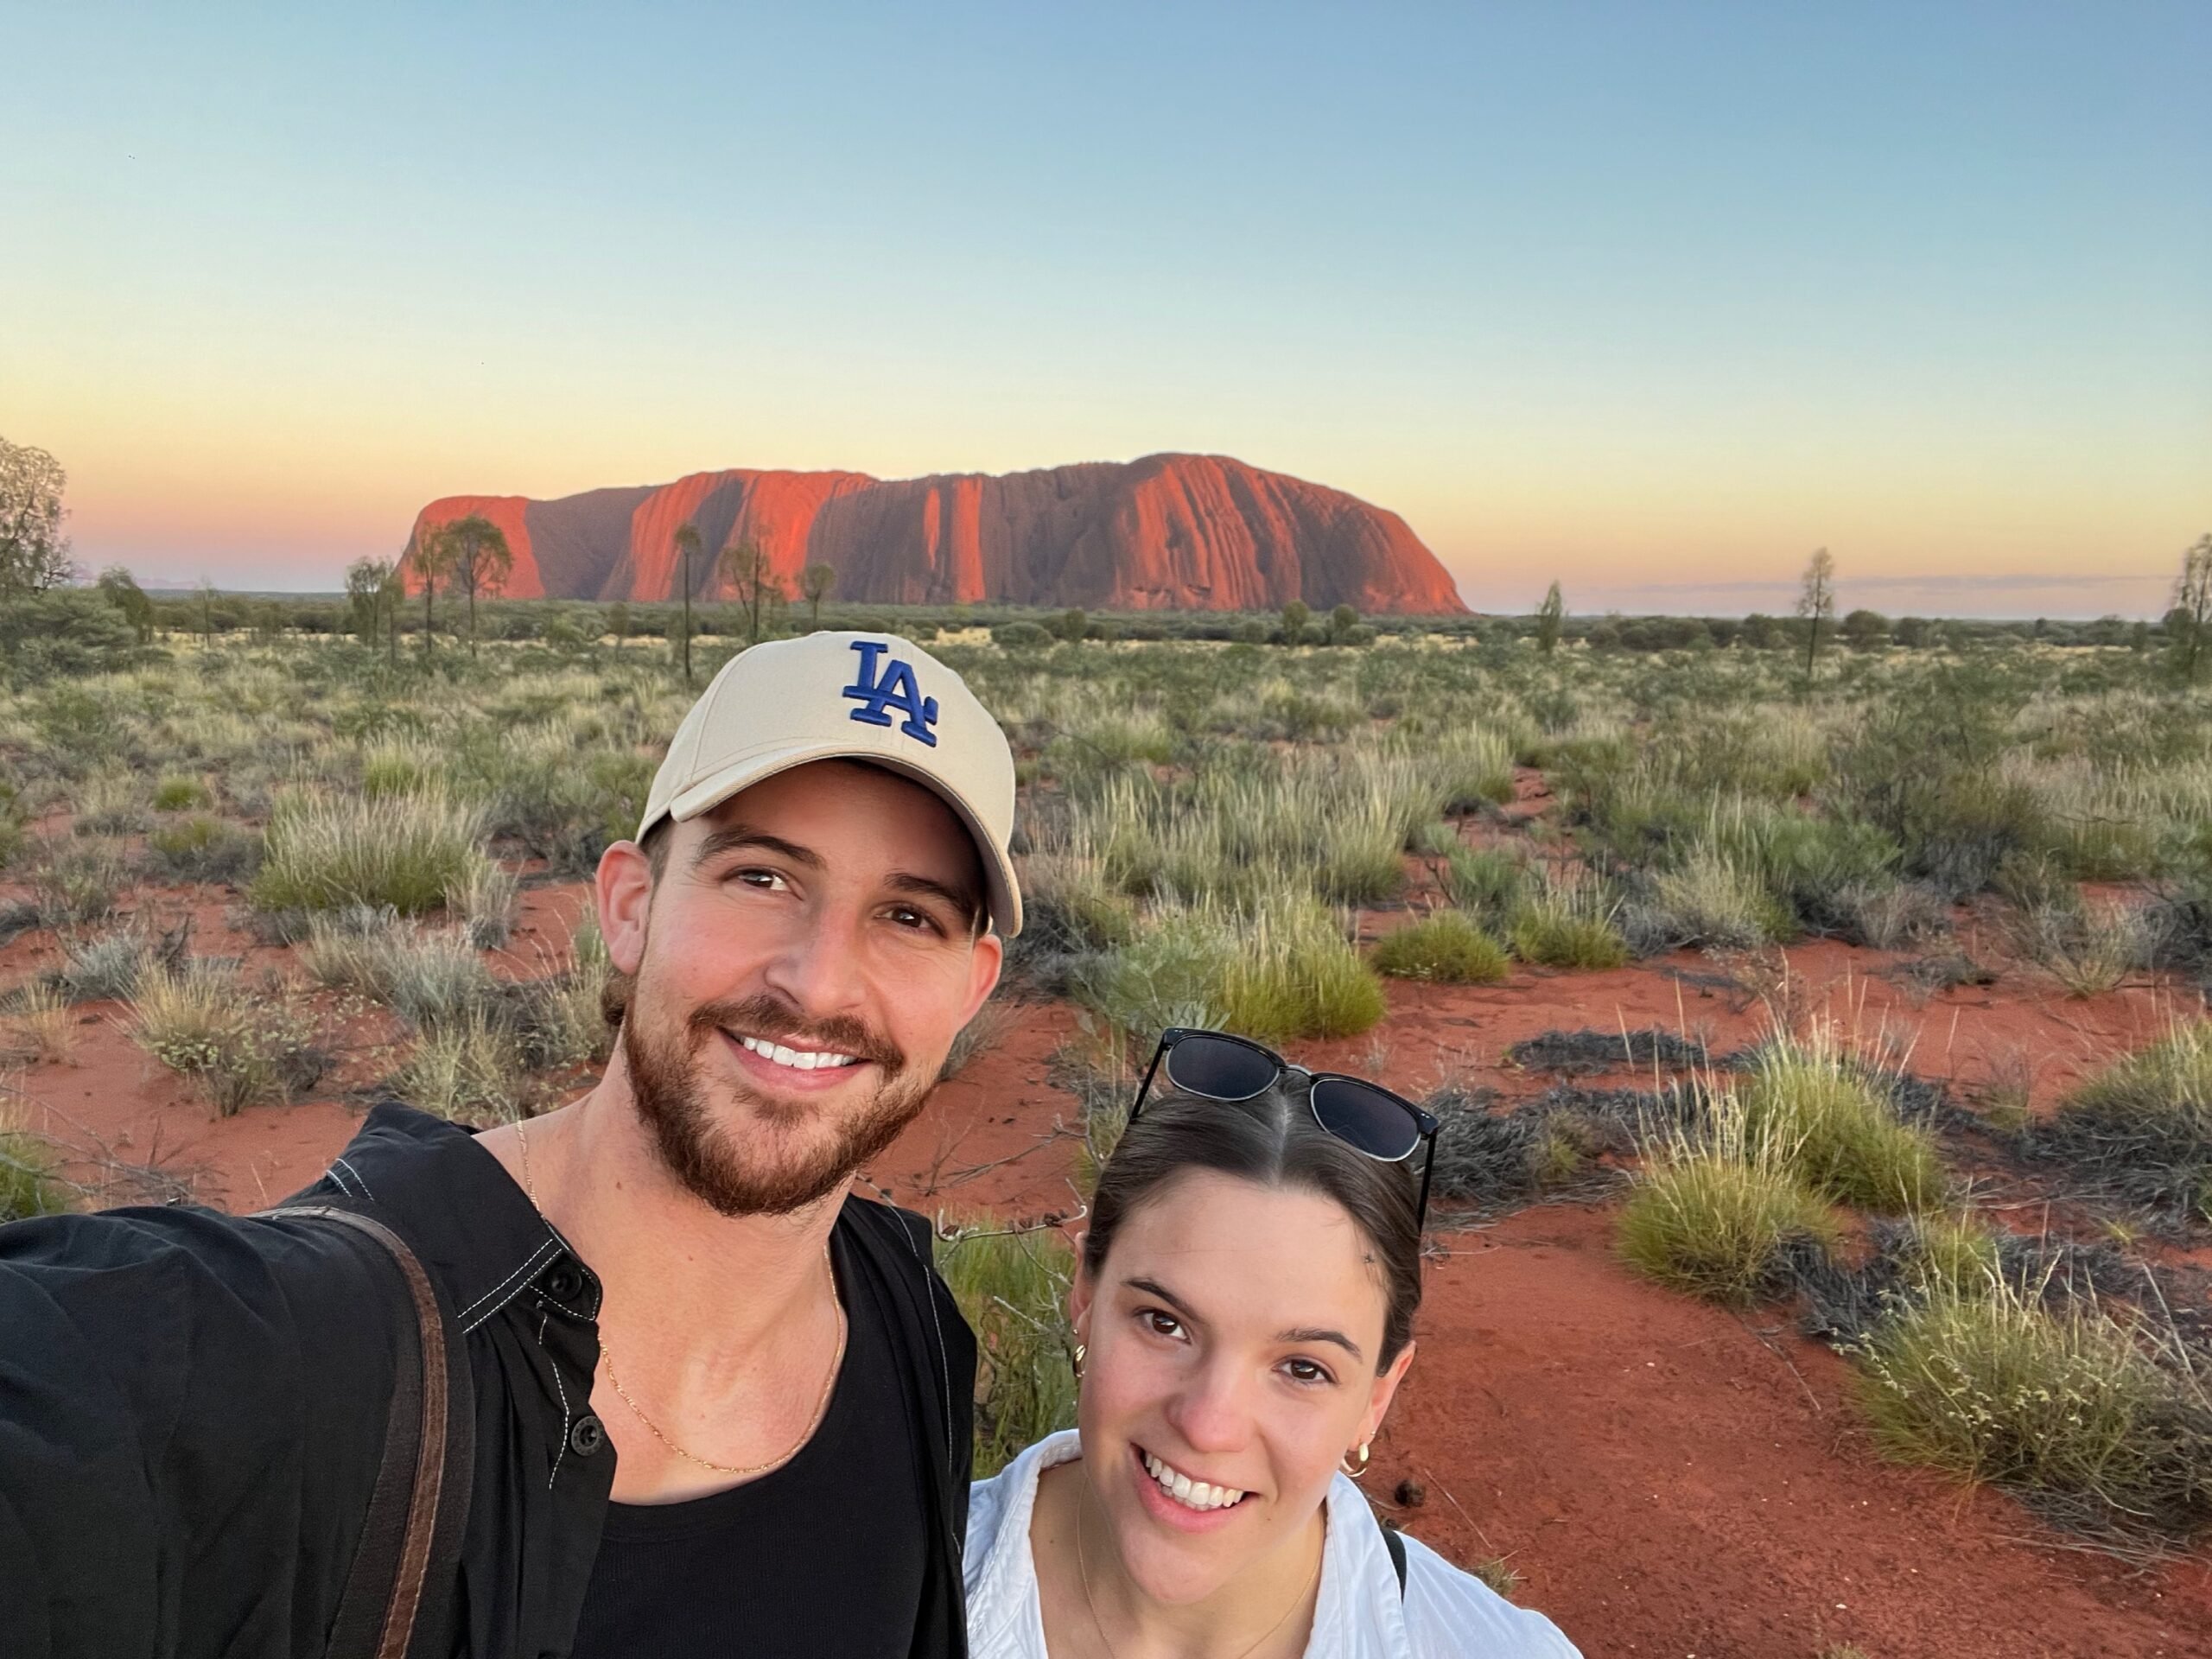 A man and woman take a selfie in a desert landscape at sunset, with a large, red rock formation in the background. The man wears a beige hat and a black shirt, the woman wears sunglasses on her head and a white shirt. Sparse vegetation surrounds them.